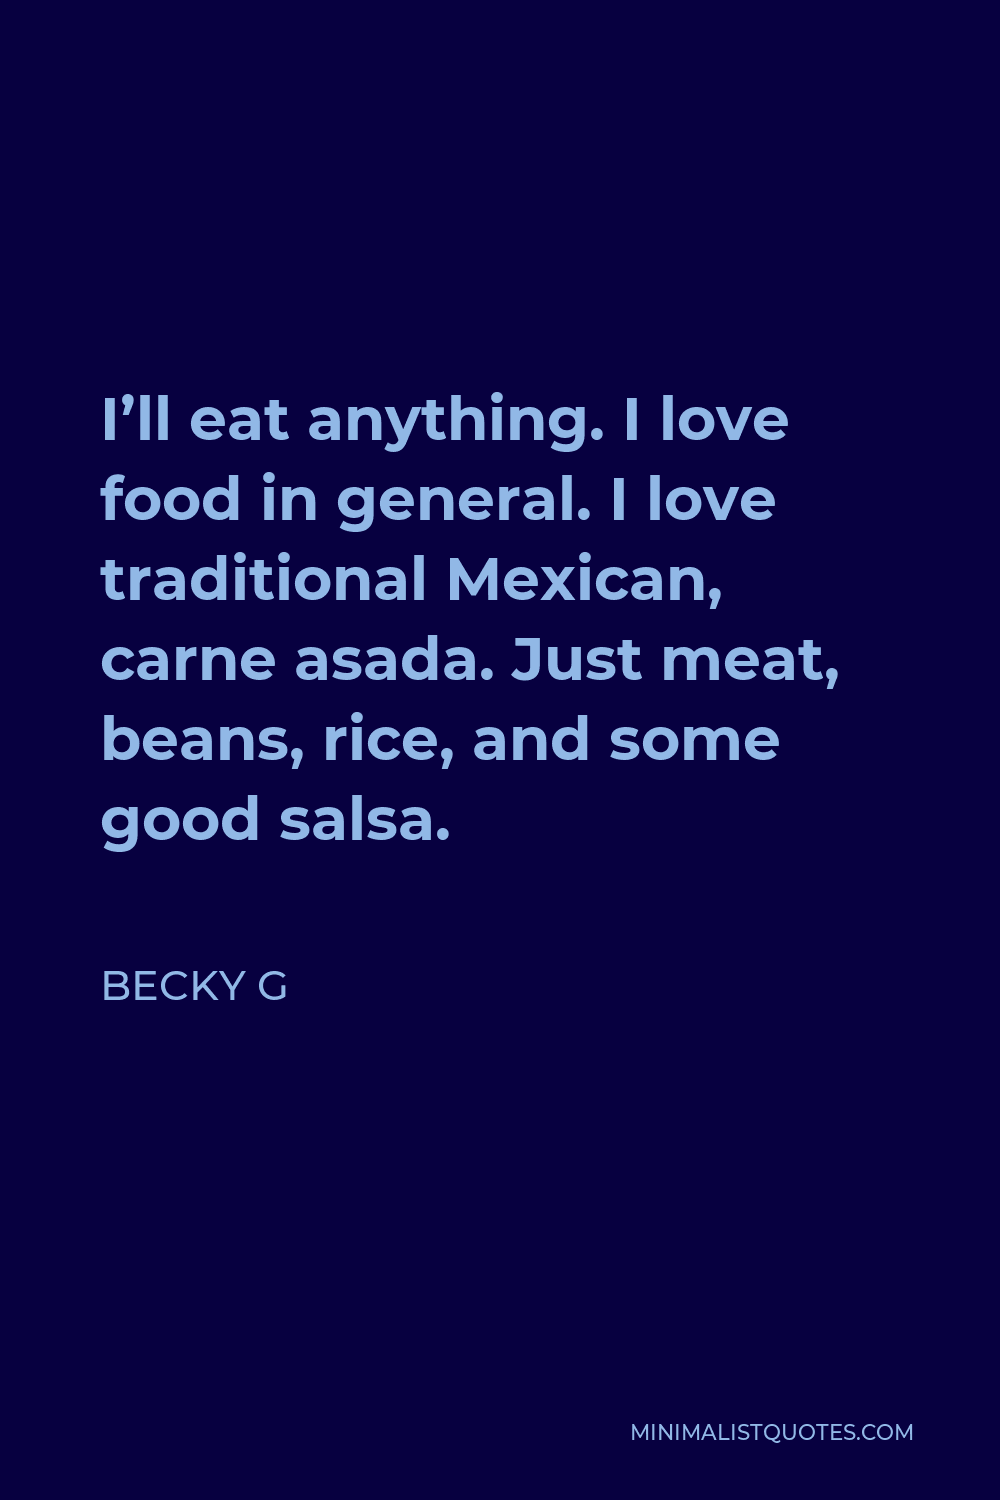 Becky G Quote - I’ll eat anything. I love food in general. I love traditional Mexican, carne asada. Just meat, beans, rice, and some good salsa.